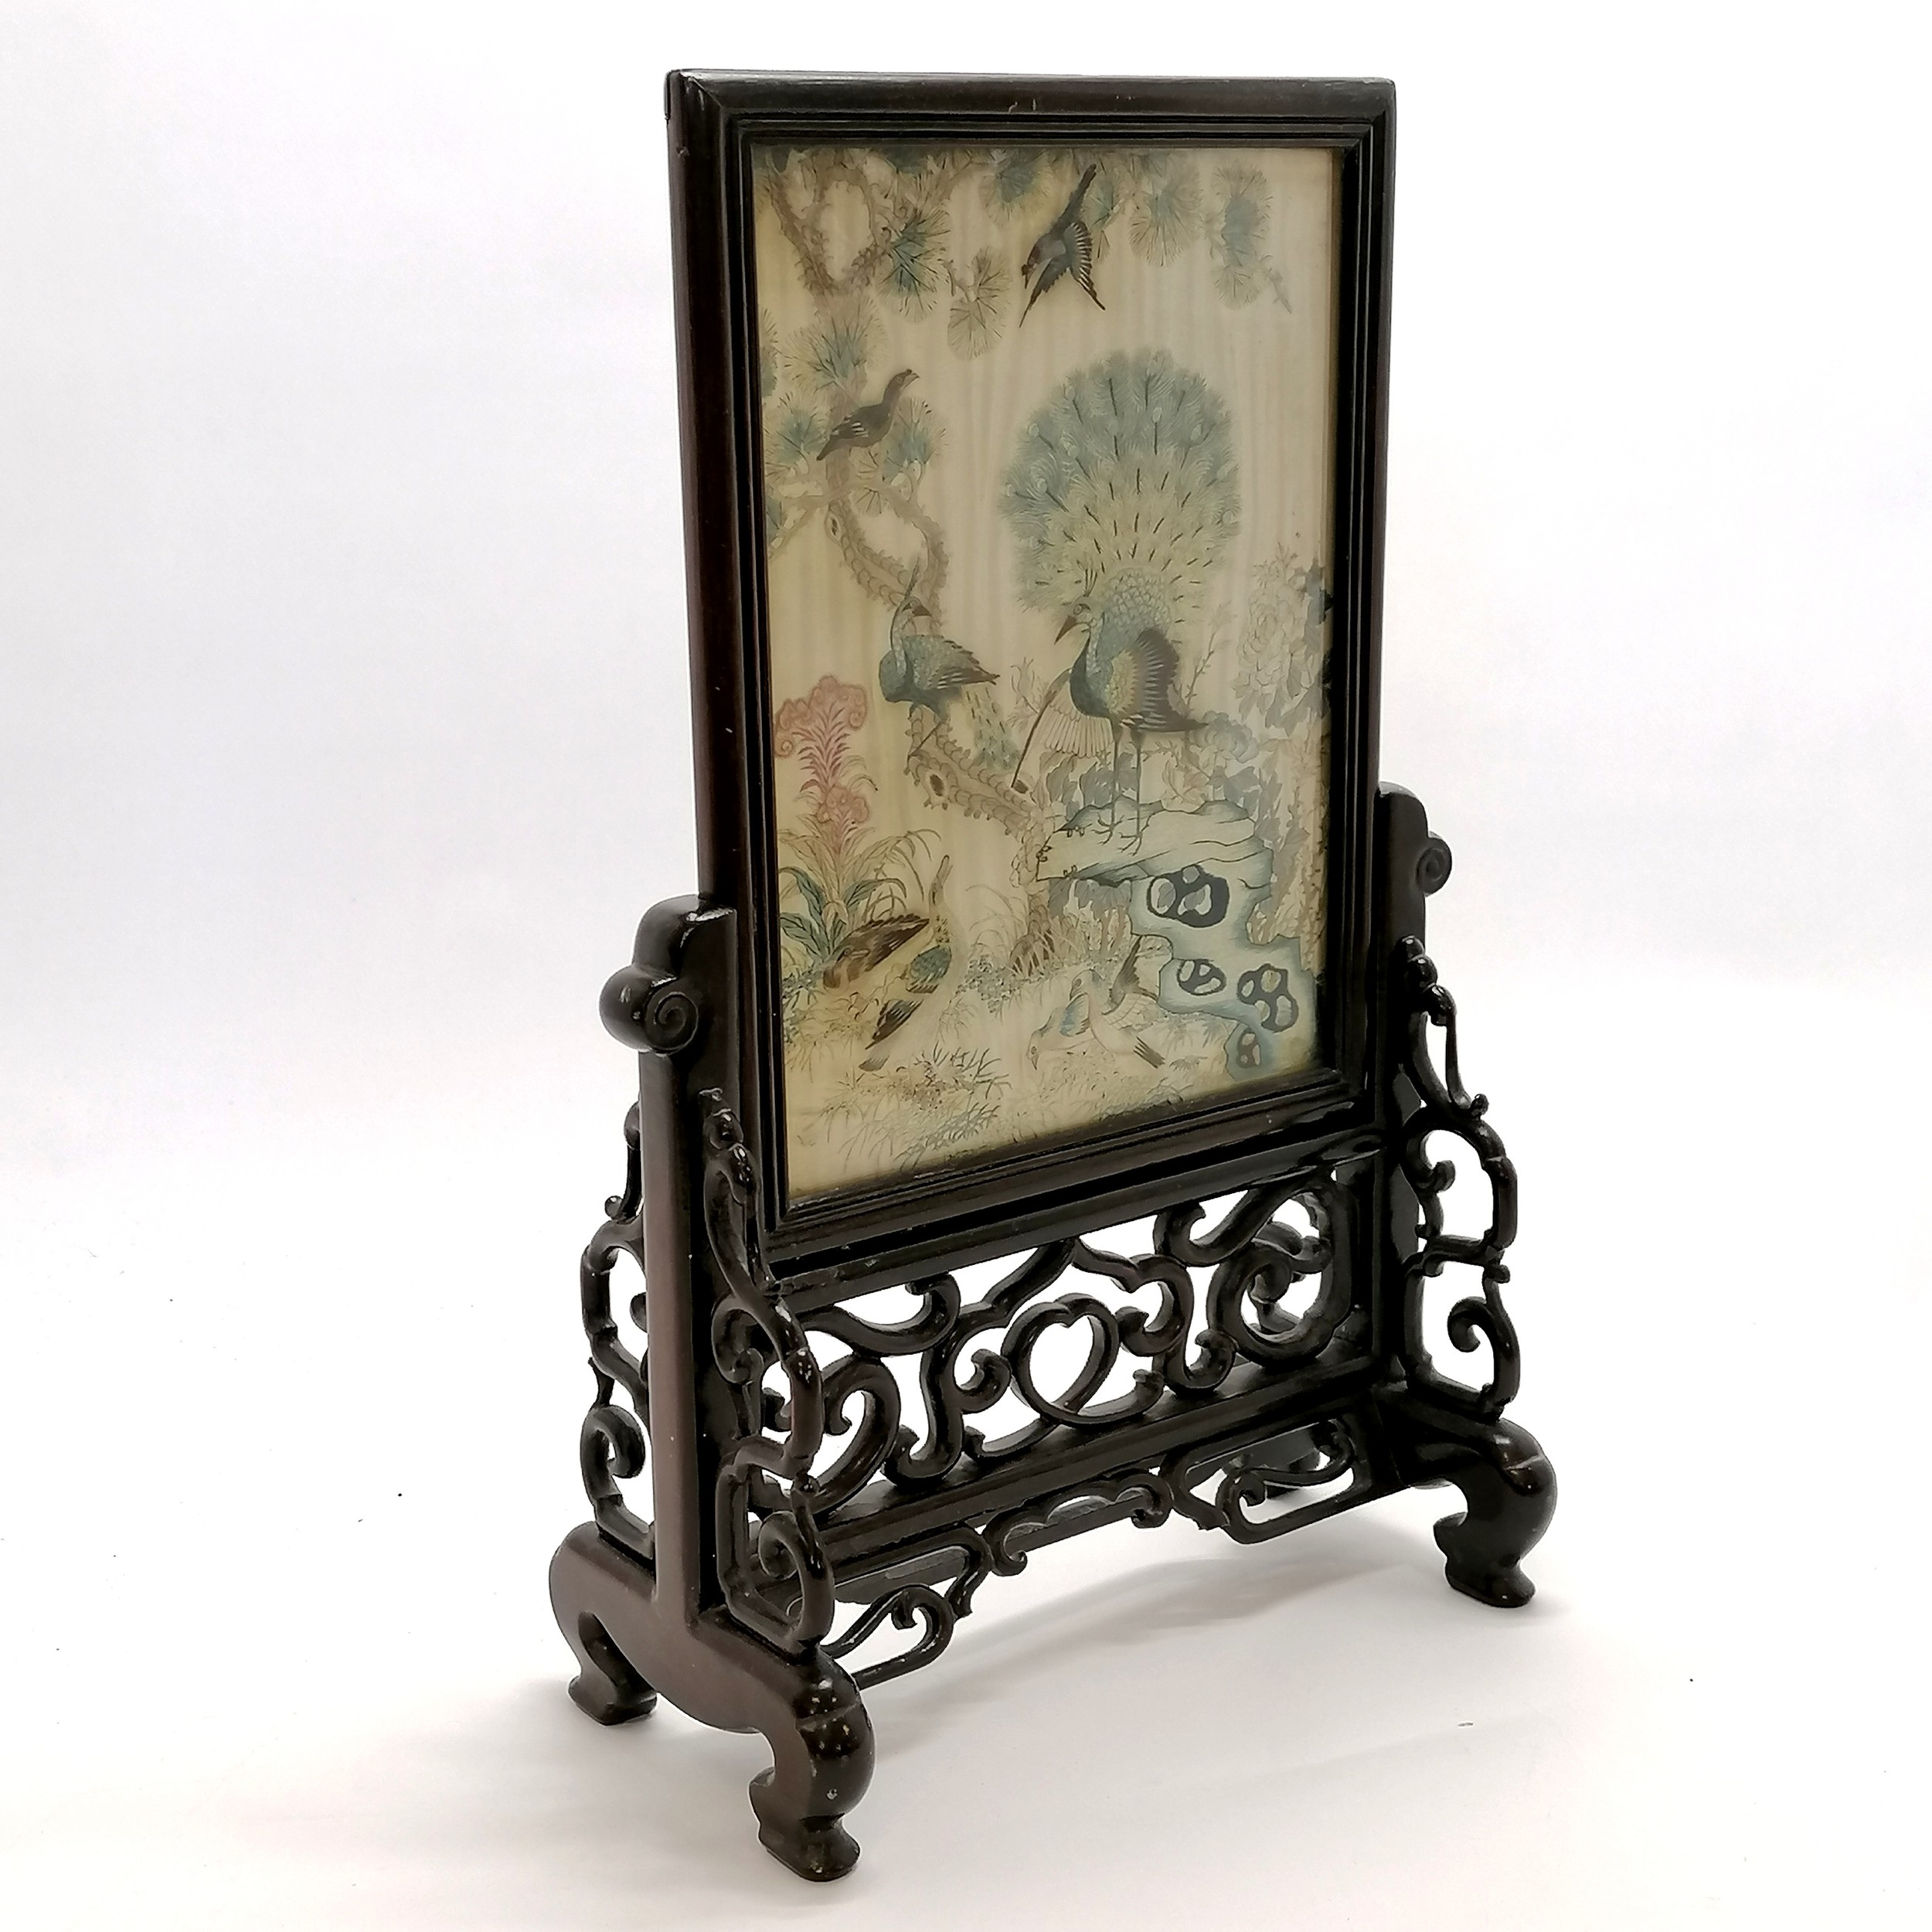 Chinese hardwood carved table screen with Antique hand embroidered panel depicting birds - 40cm high - Image 3 of 4